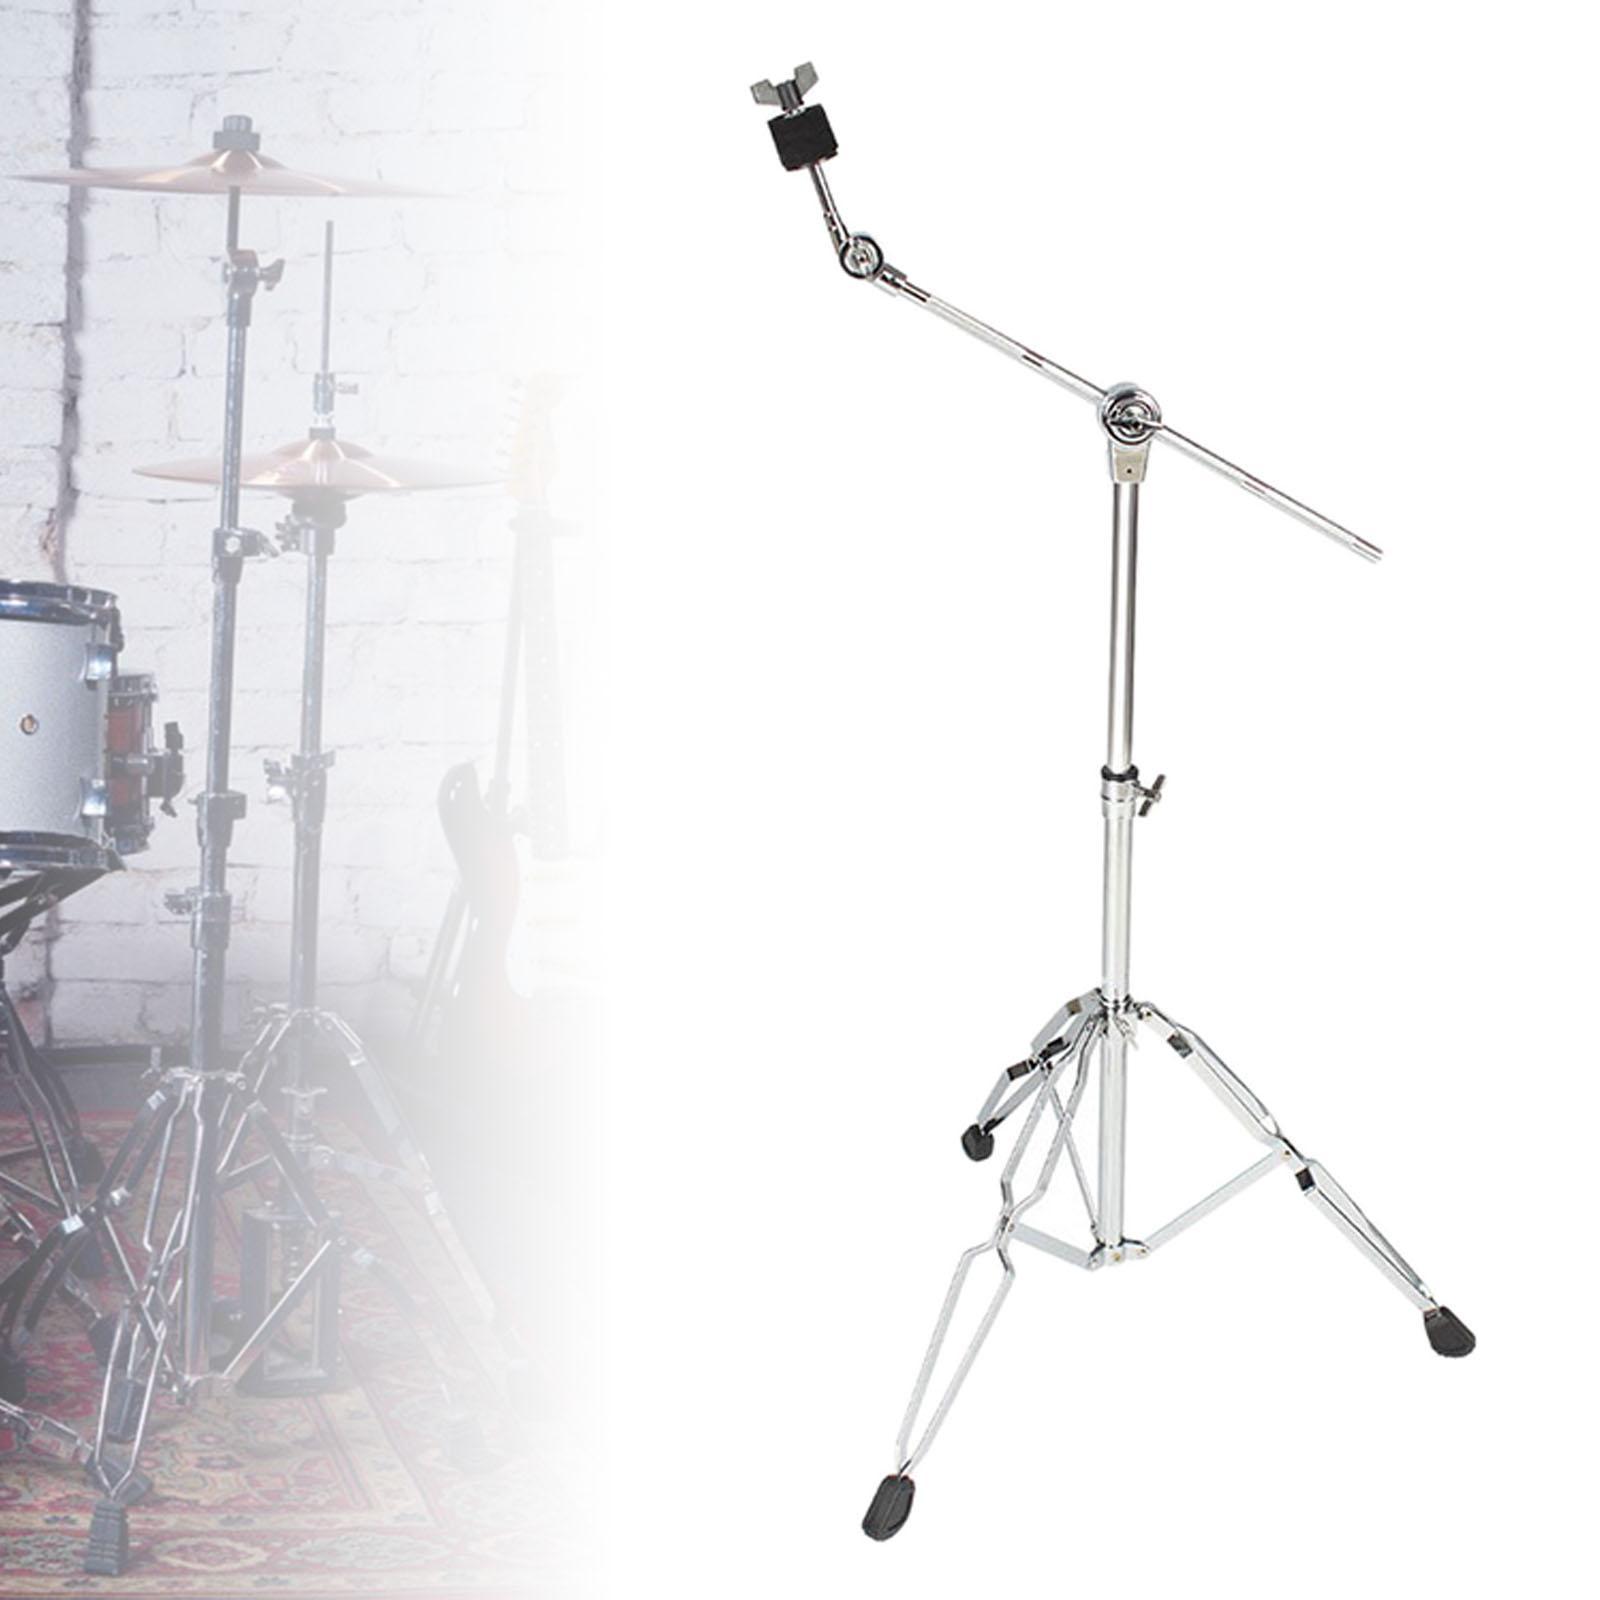 Cymbal Stand Adjustable Foldable Full Metal Stable Triangular Stand